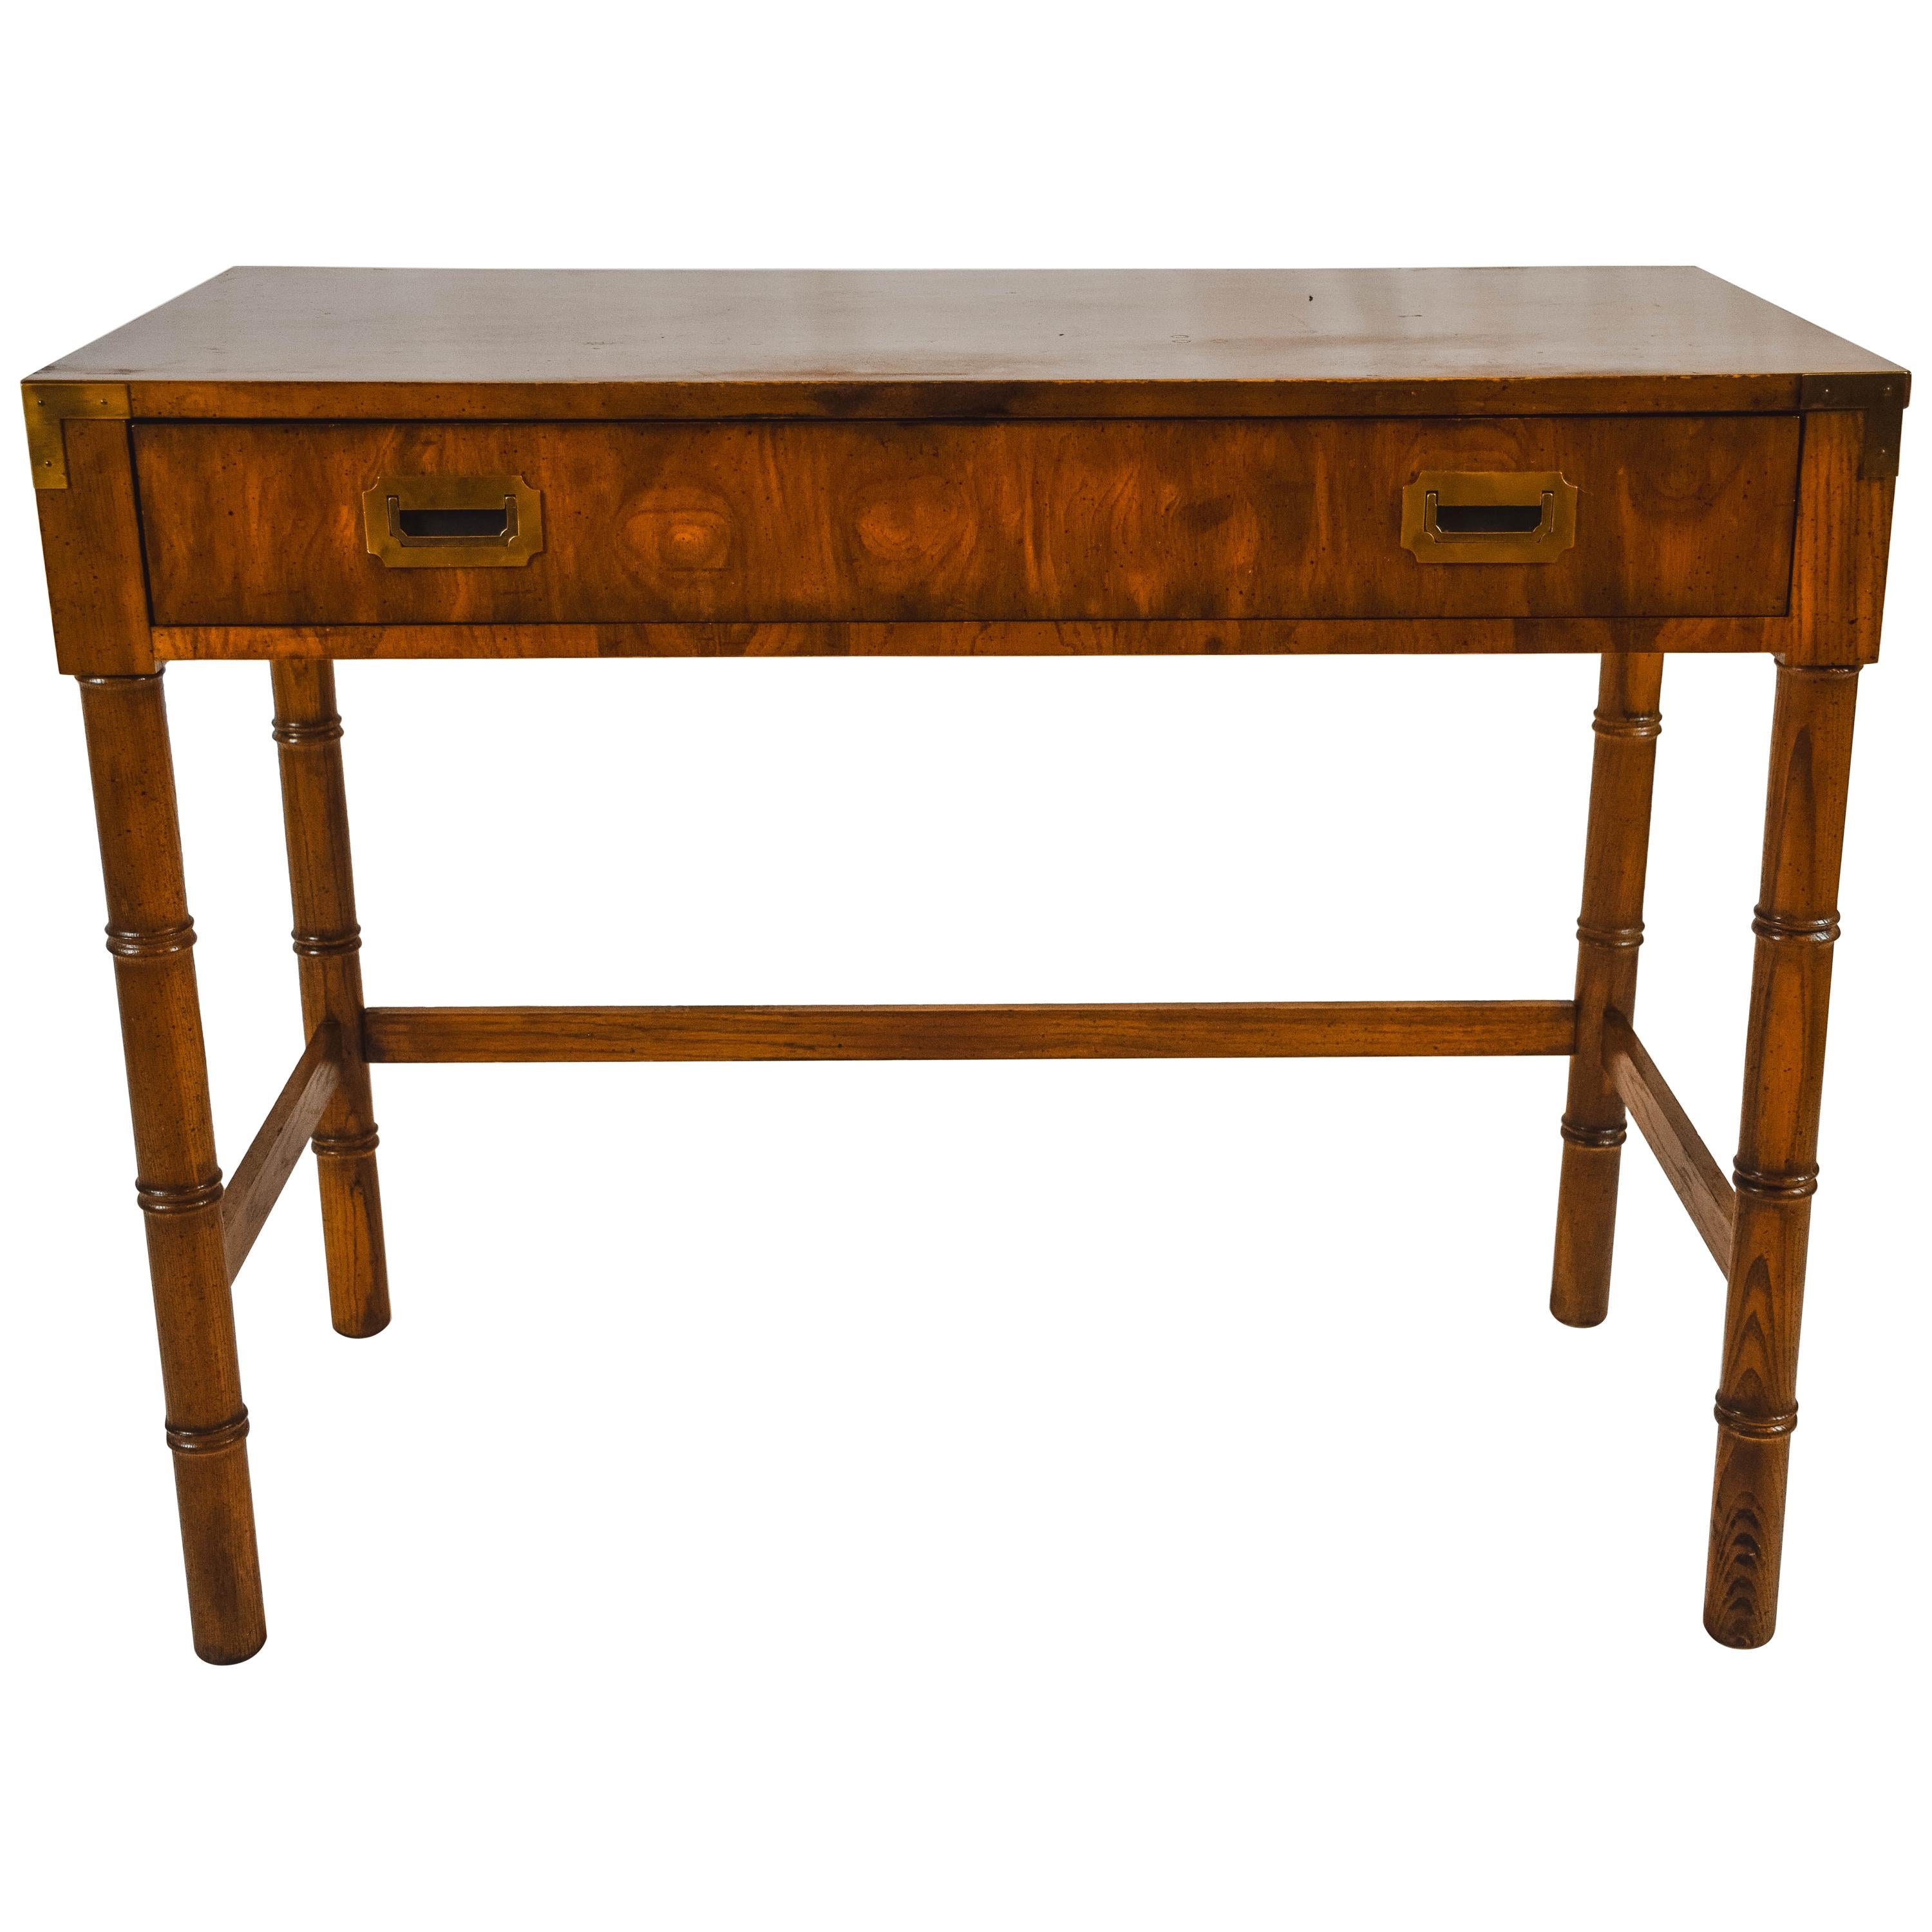 Midcentury Campaign Style Desk by Dixie Furniture